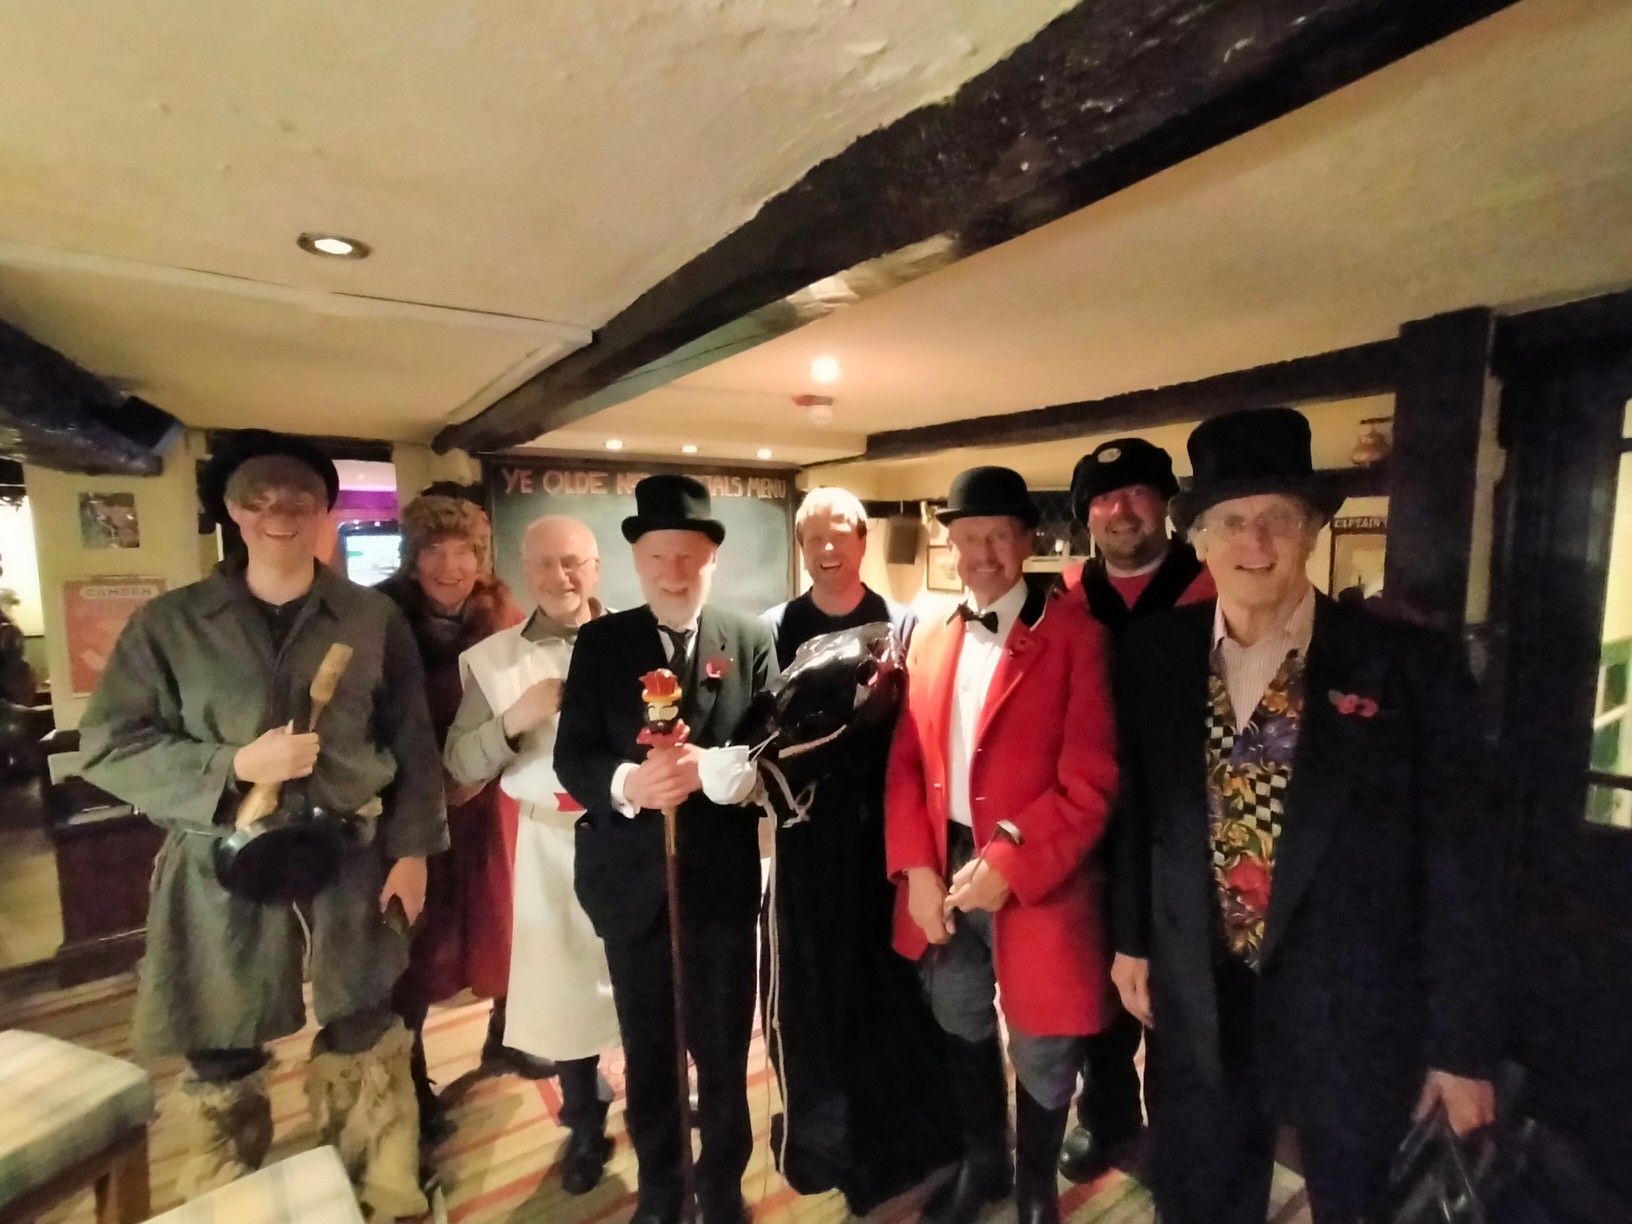 The Gang after the performance in the Old No3 in Little Bollington